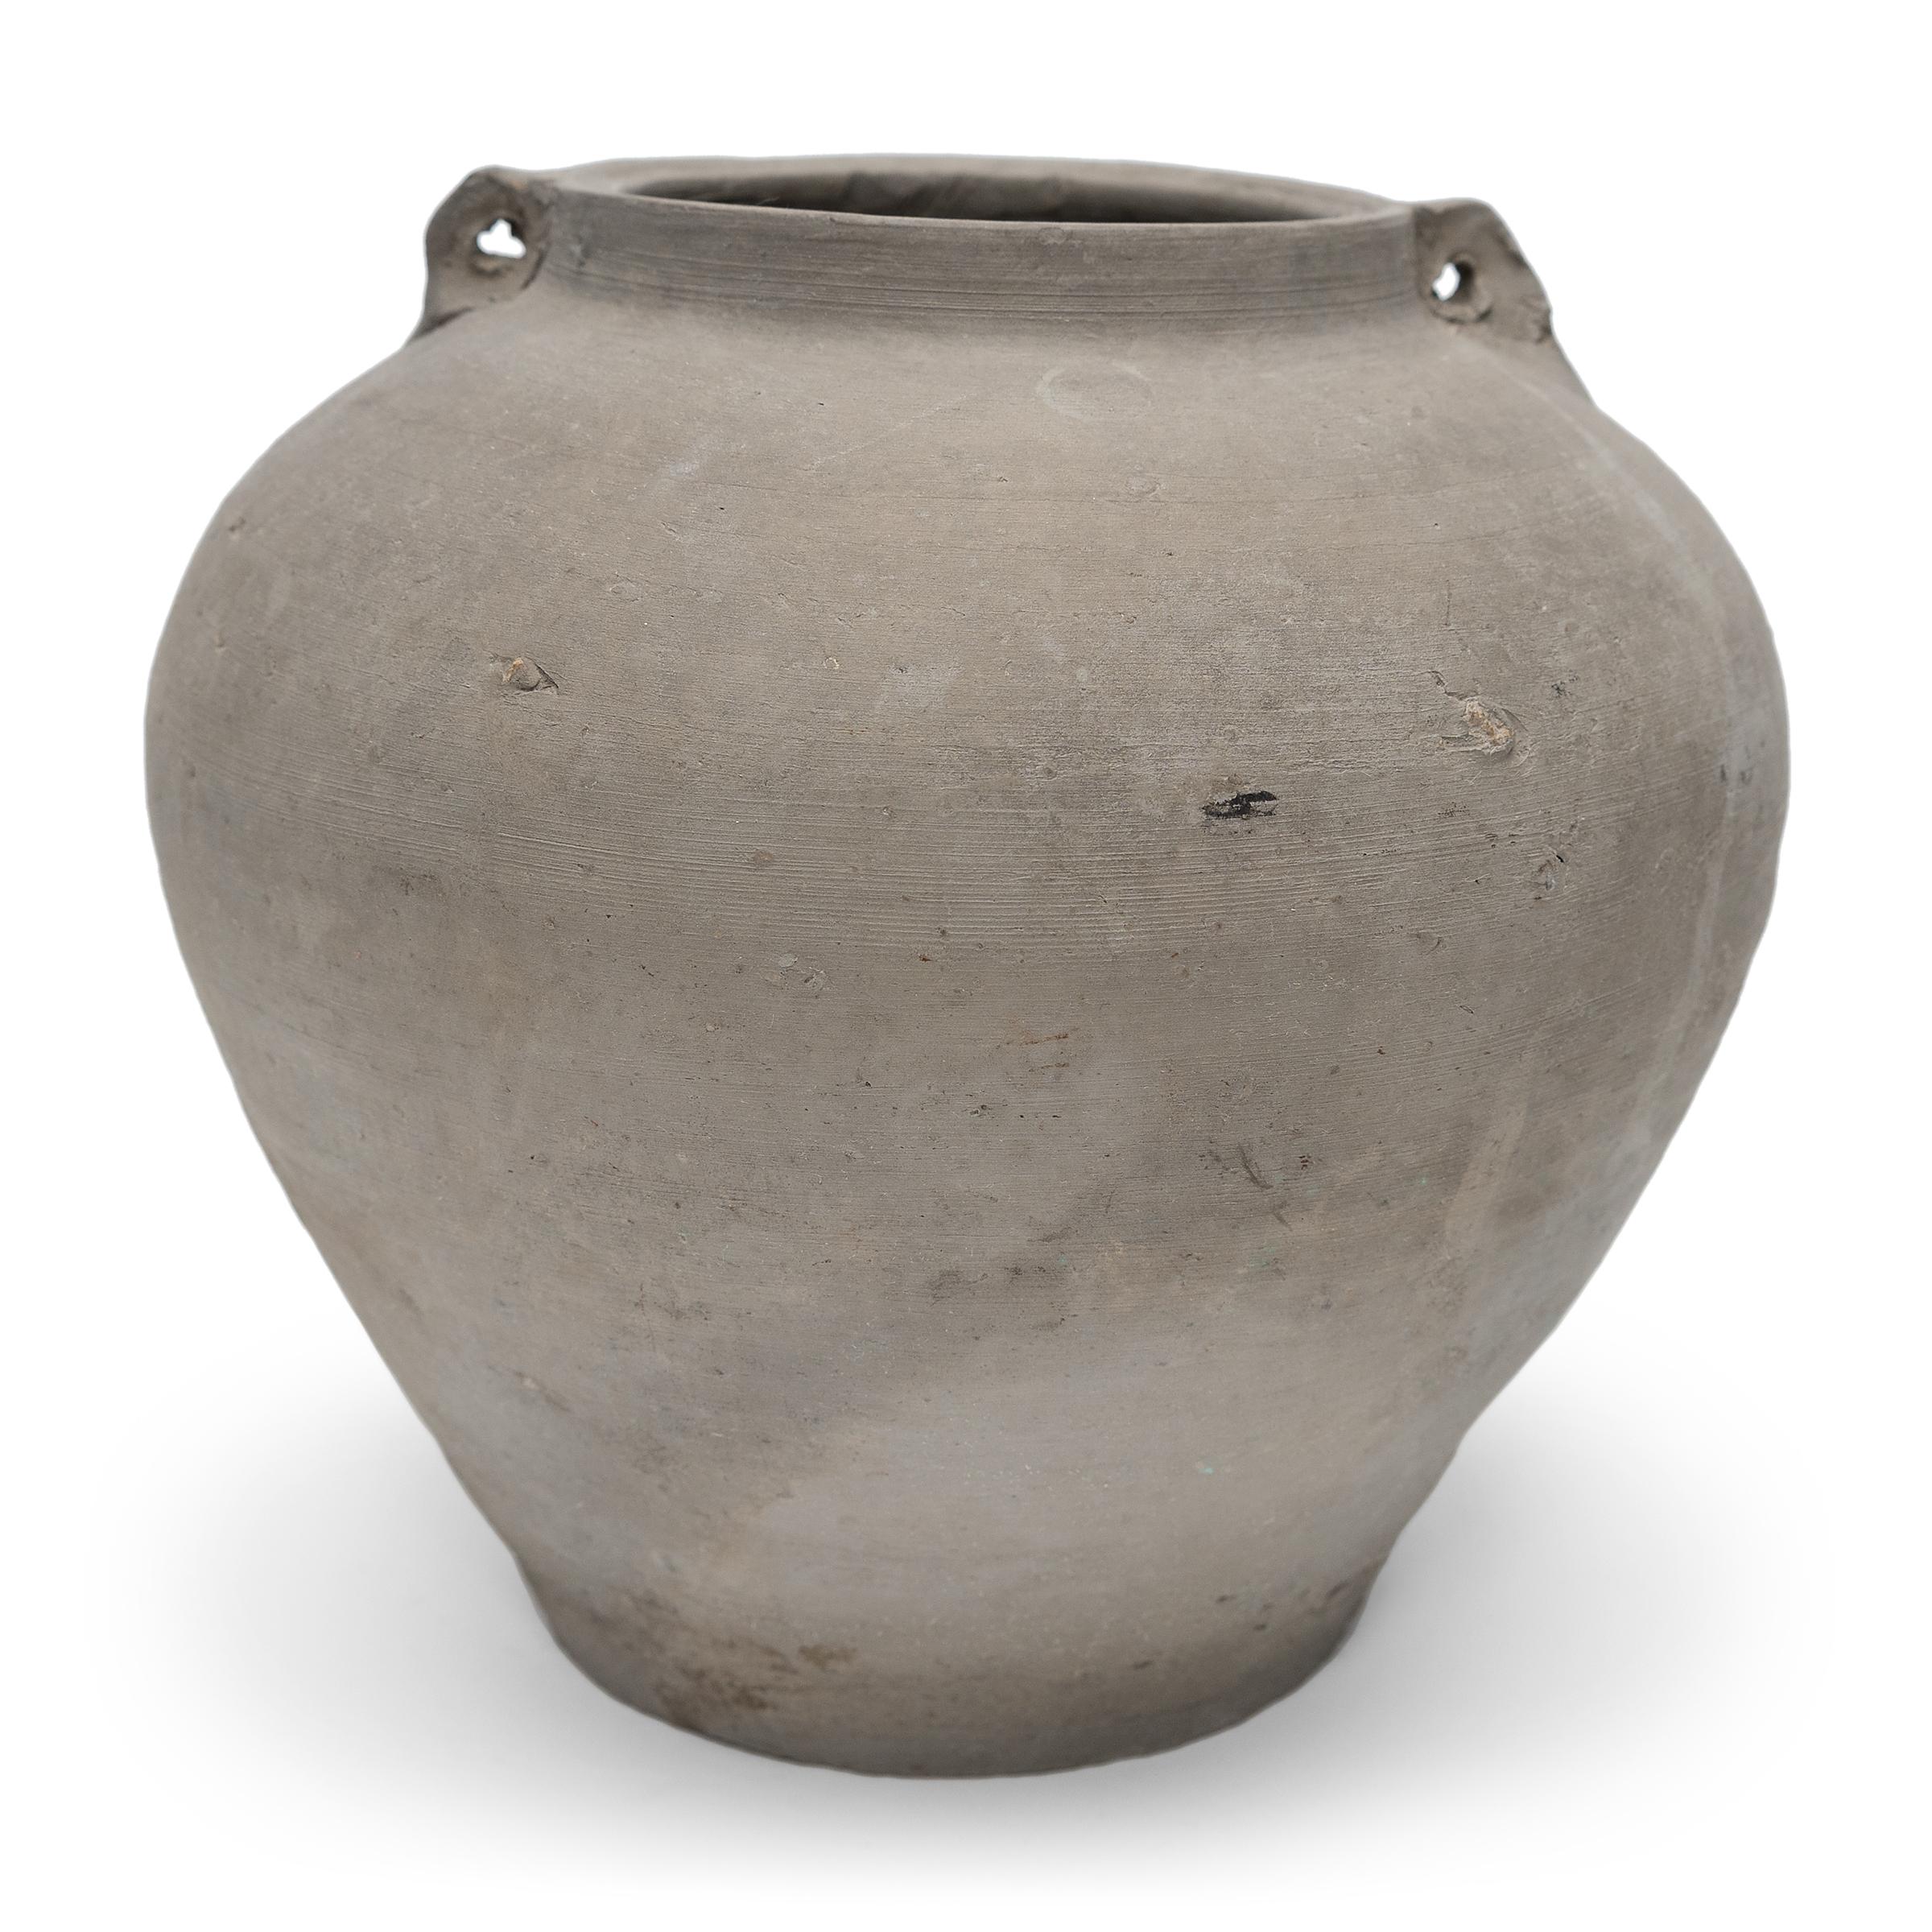 Charged with the humble task of storing dry goods, this small earthenware jar was hand-shaped in the early 20th century with balanced proportions and a beautifully irregular unglazed surface. The round jar has a tapered form with a narrow base, high